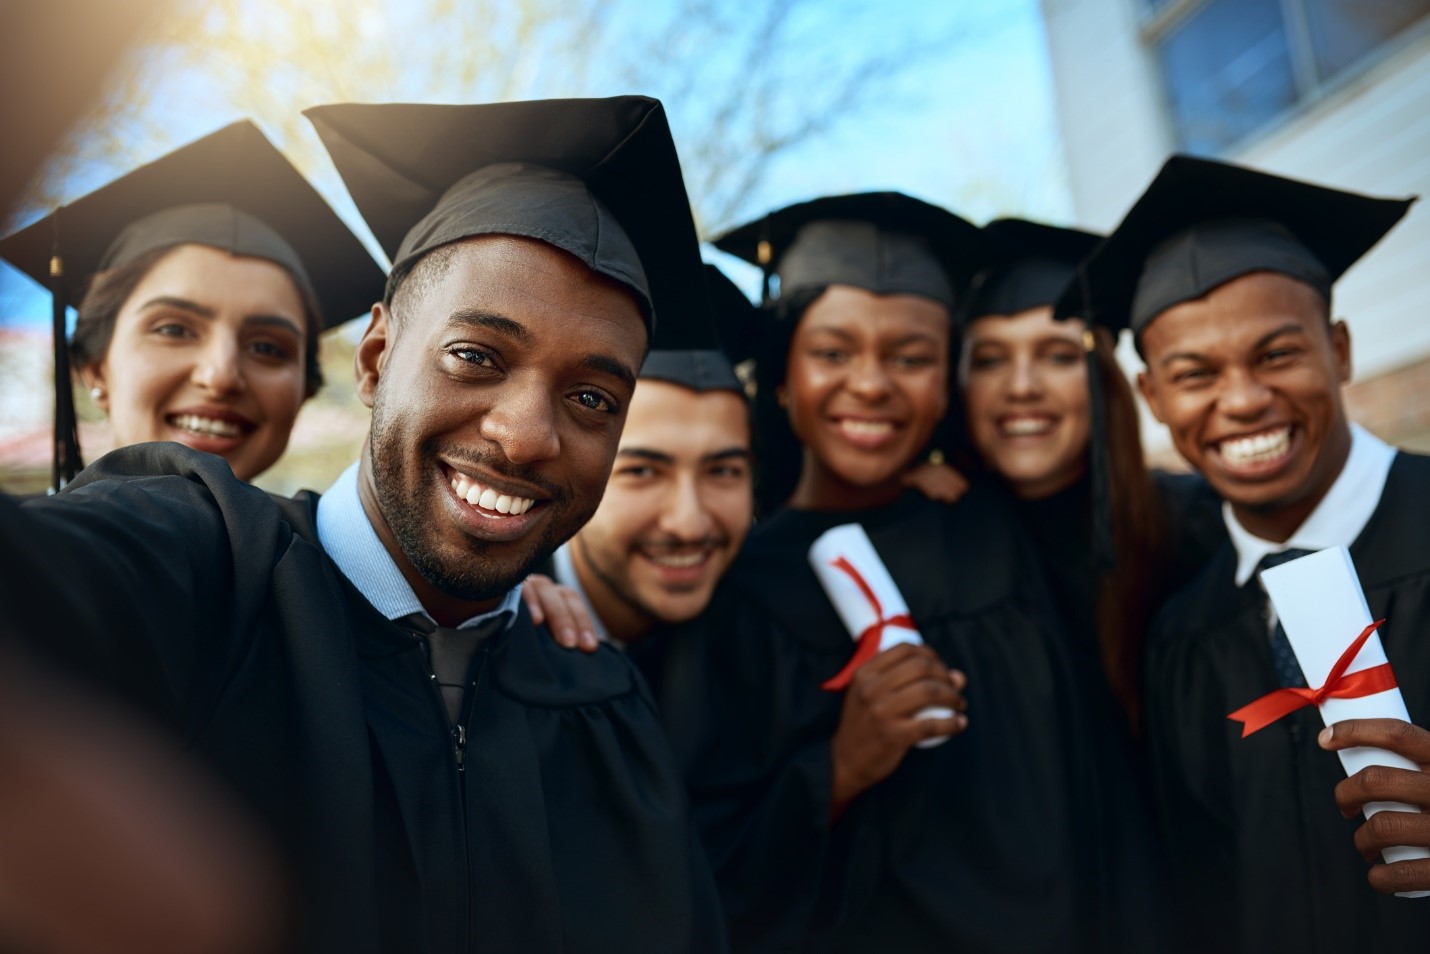 Six graduates taking a selfie while wearing their black graduation robes and hats